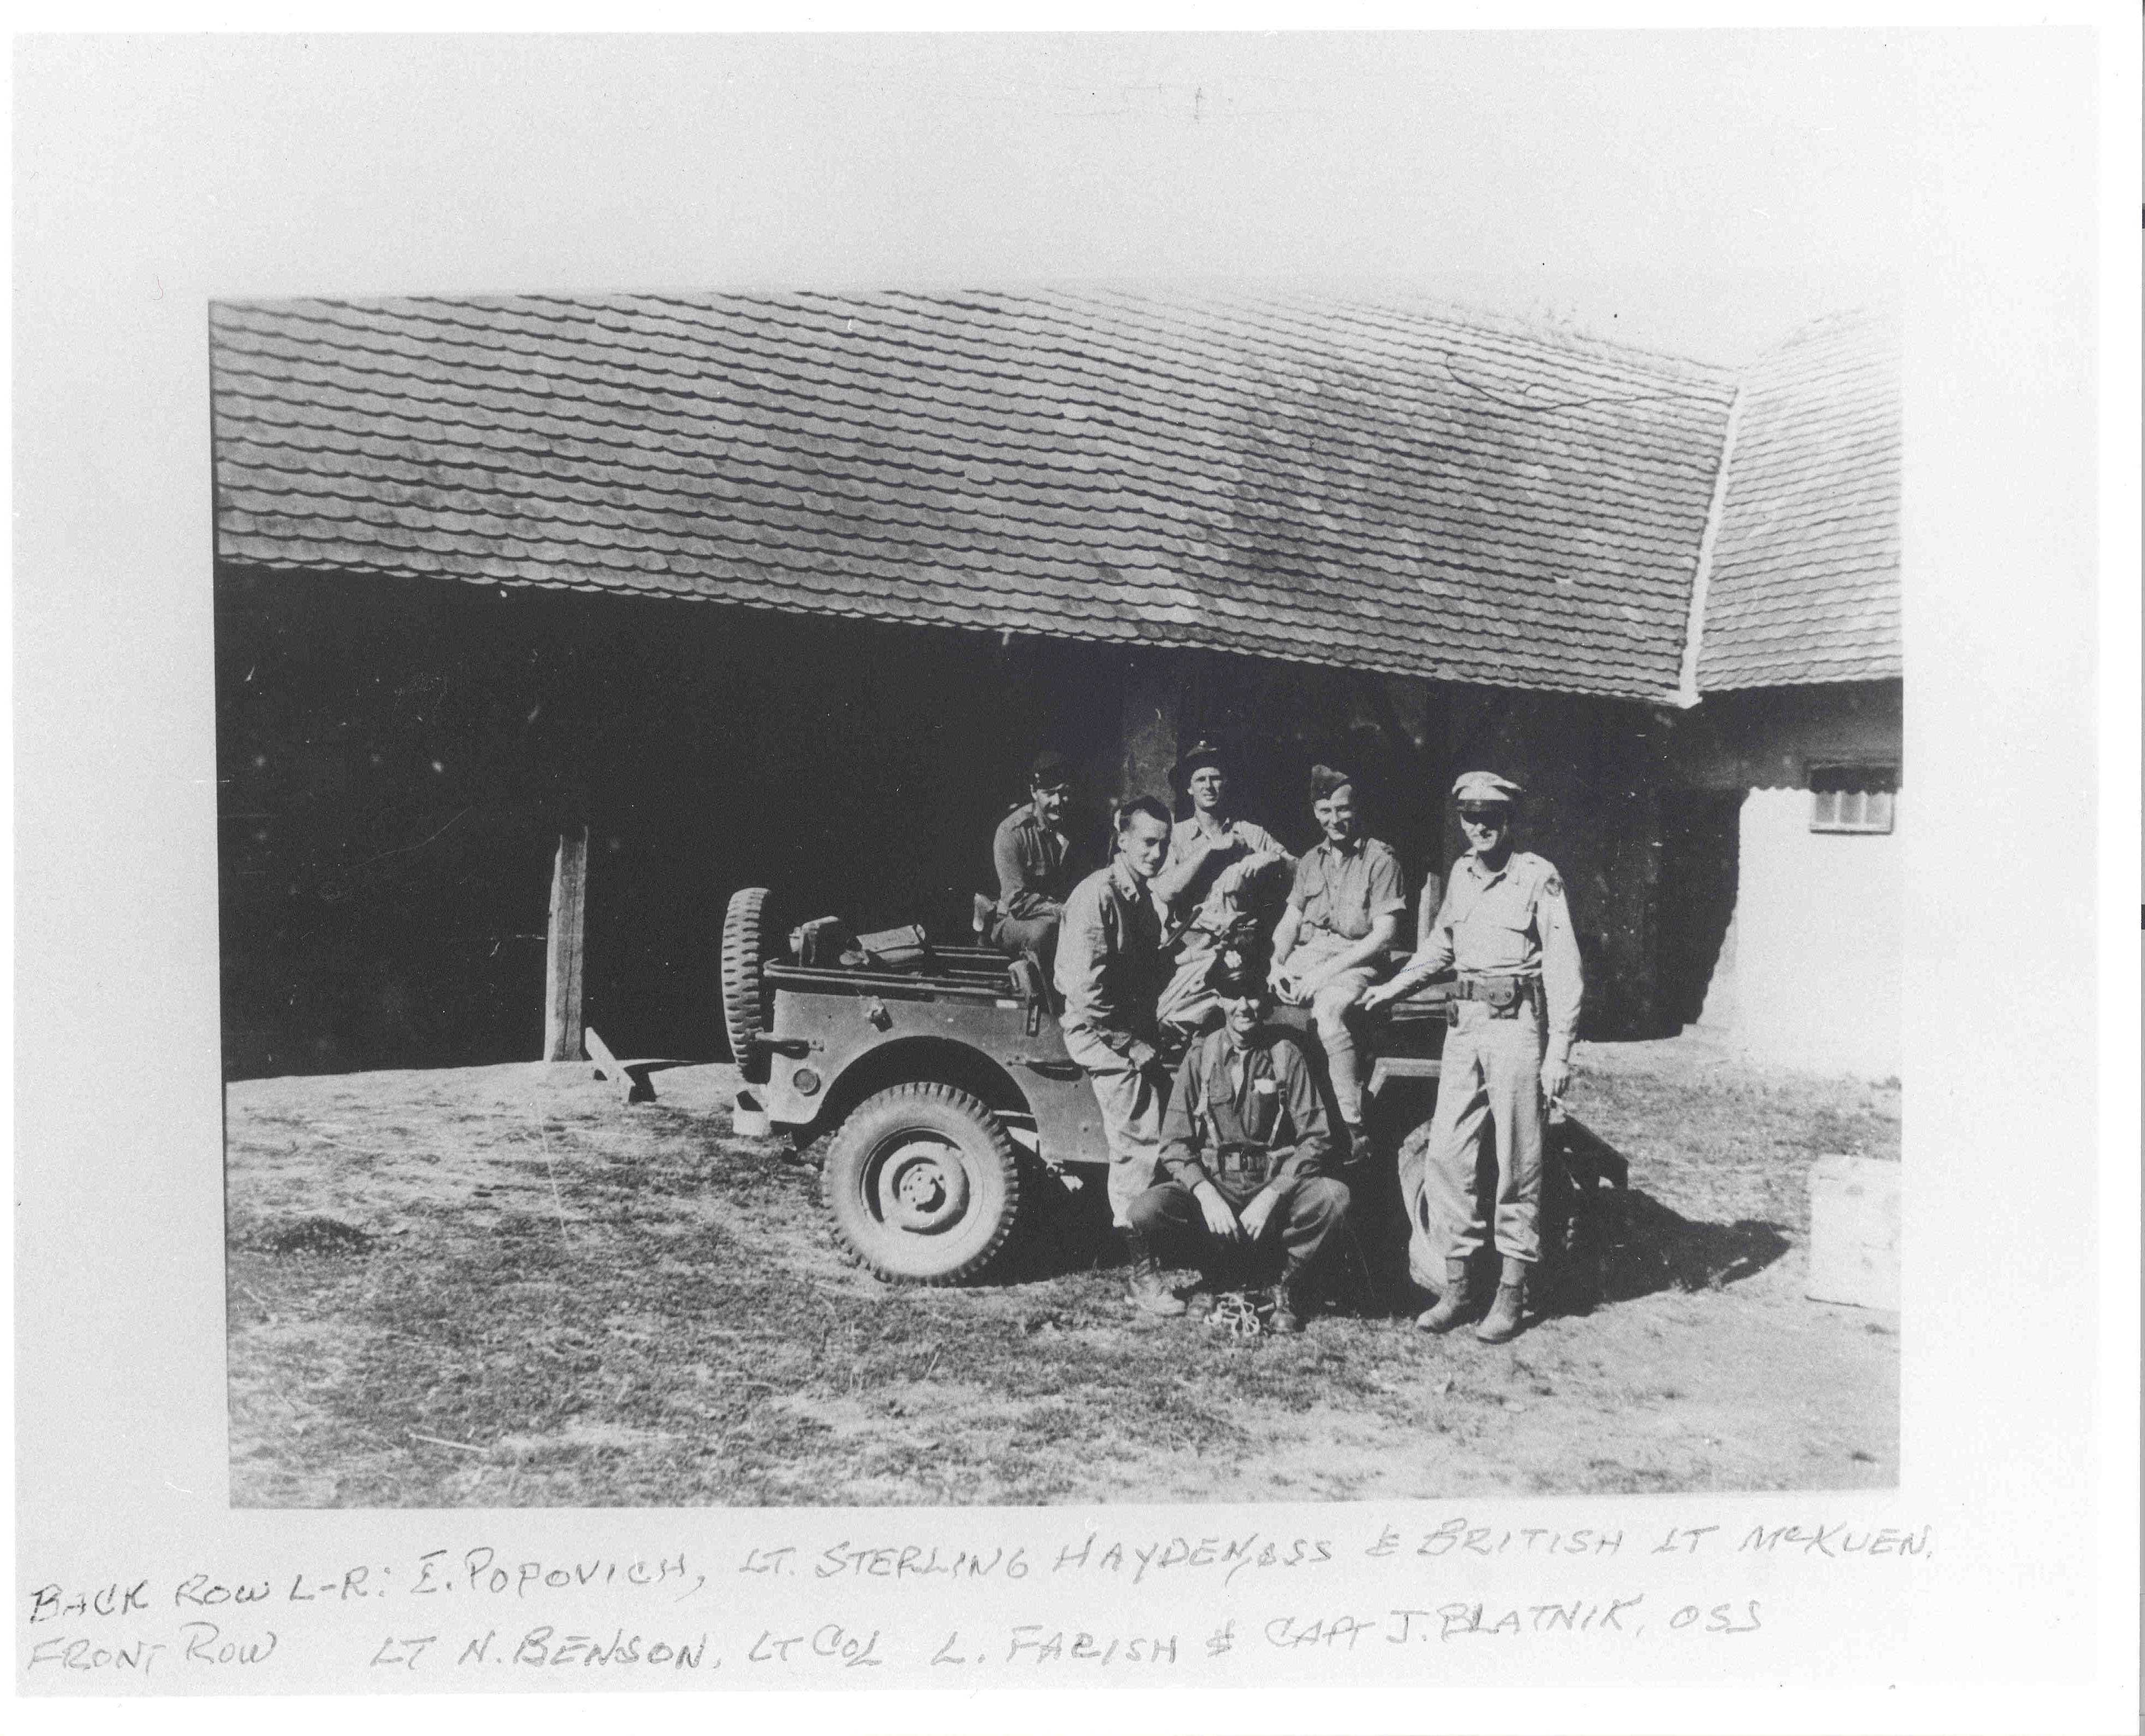 A faded black and white image of a group of men sitting on a car outside of a building.